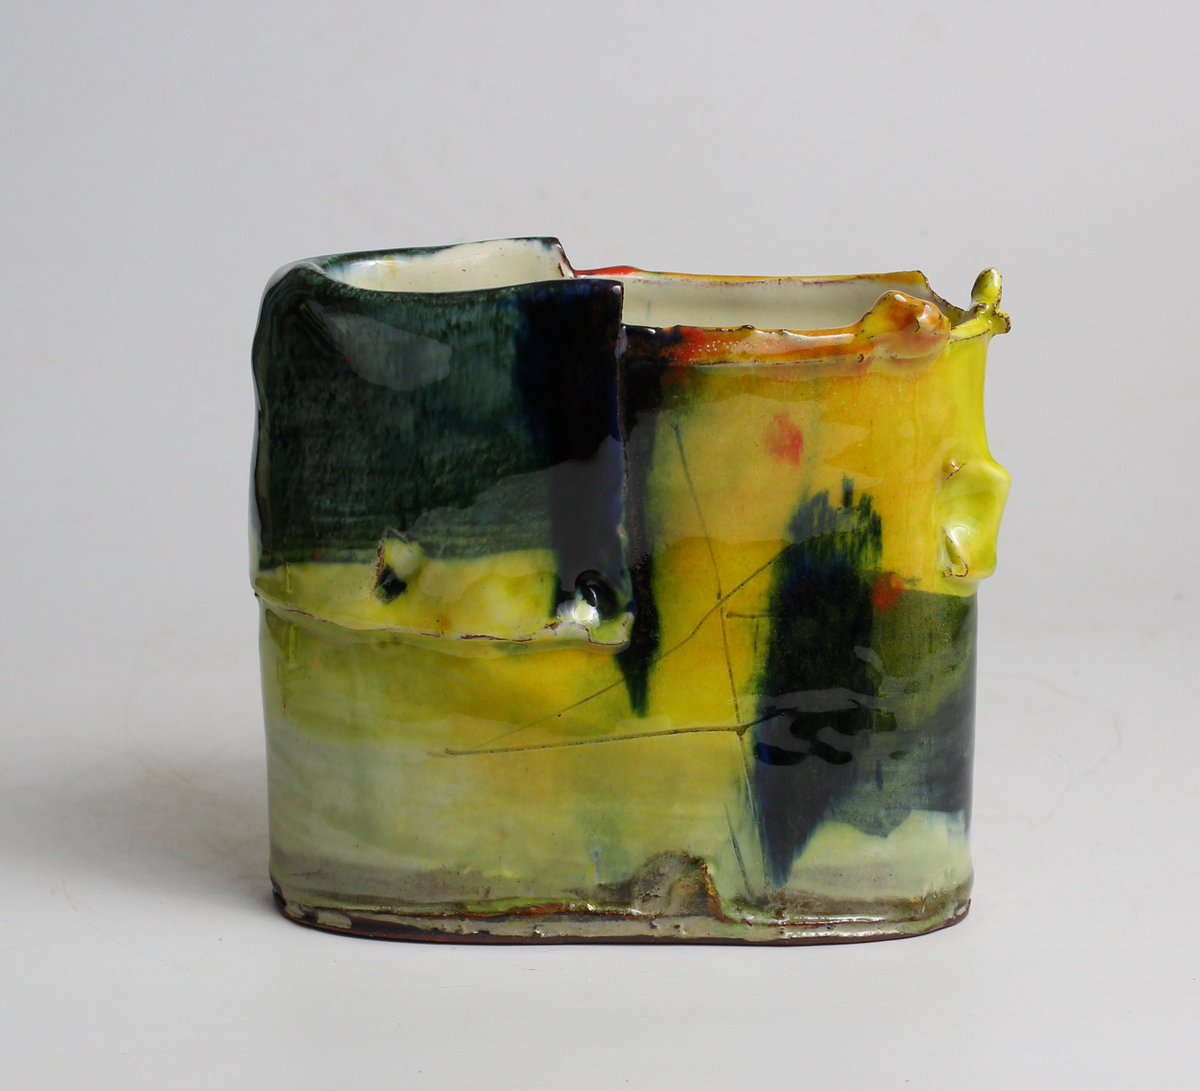 SOLD! 

Barry Stedman ‘Vessel with Yellow’ off to its new home in Portugal! 

 #barrystedman #vessel #yellow #blackmoregallery #lymm #cheshire #ceramic #ceramics #pottery #glaze #contemporaryceramics #home #homedecor #interiordesign #interiordecor #handmade